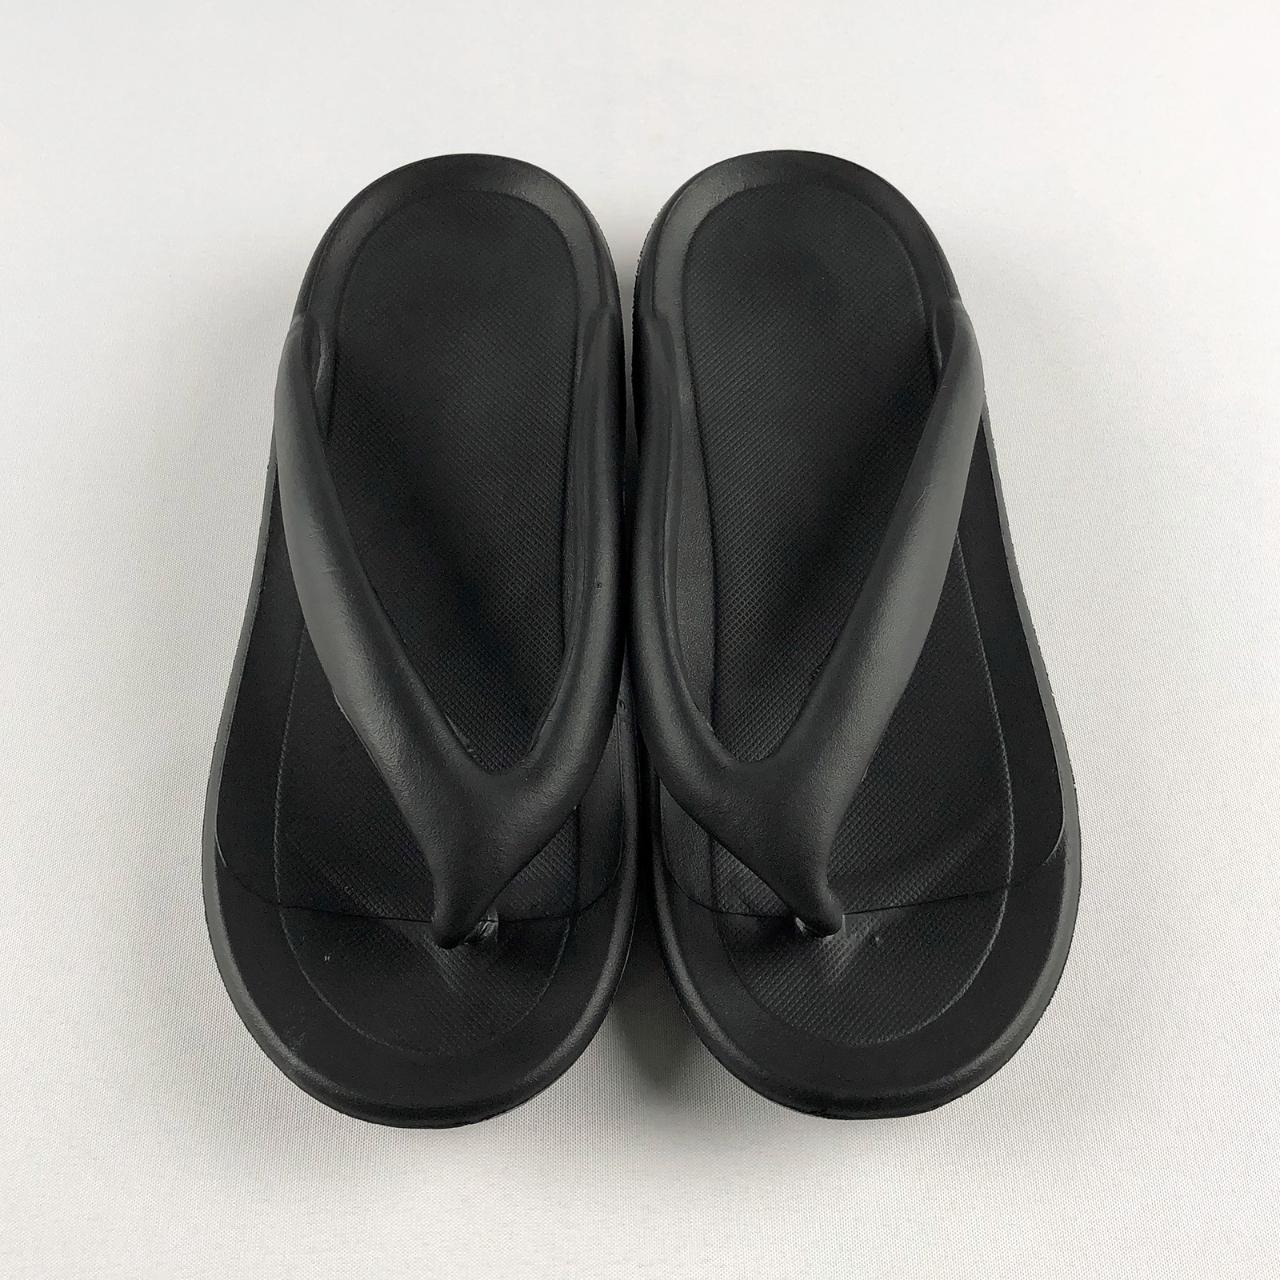 Rubber Chunky Toe Thong Sandals